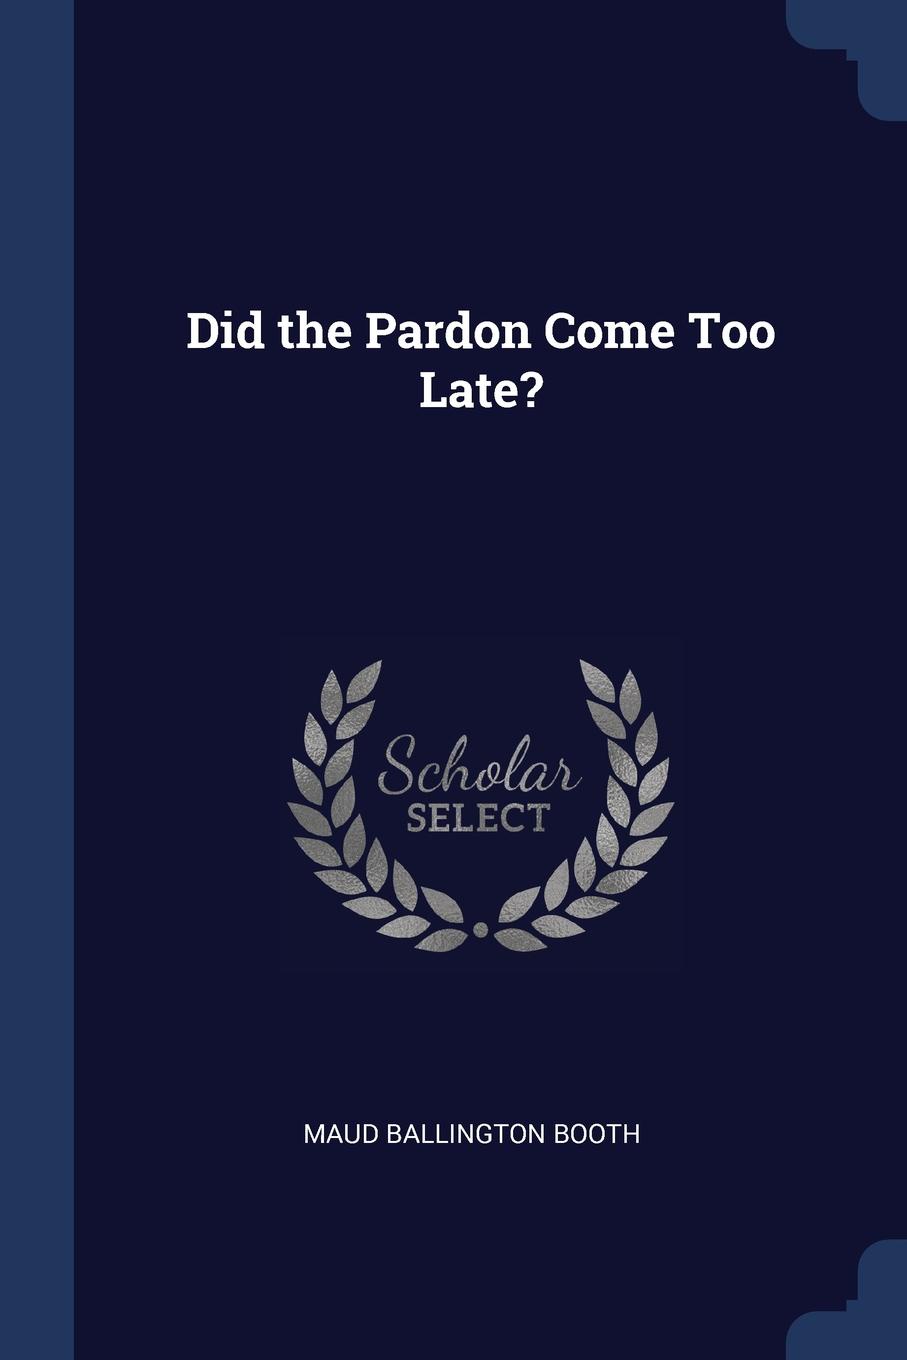 Did the Pardon Come Too Late.